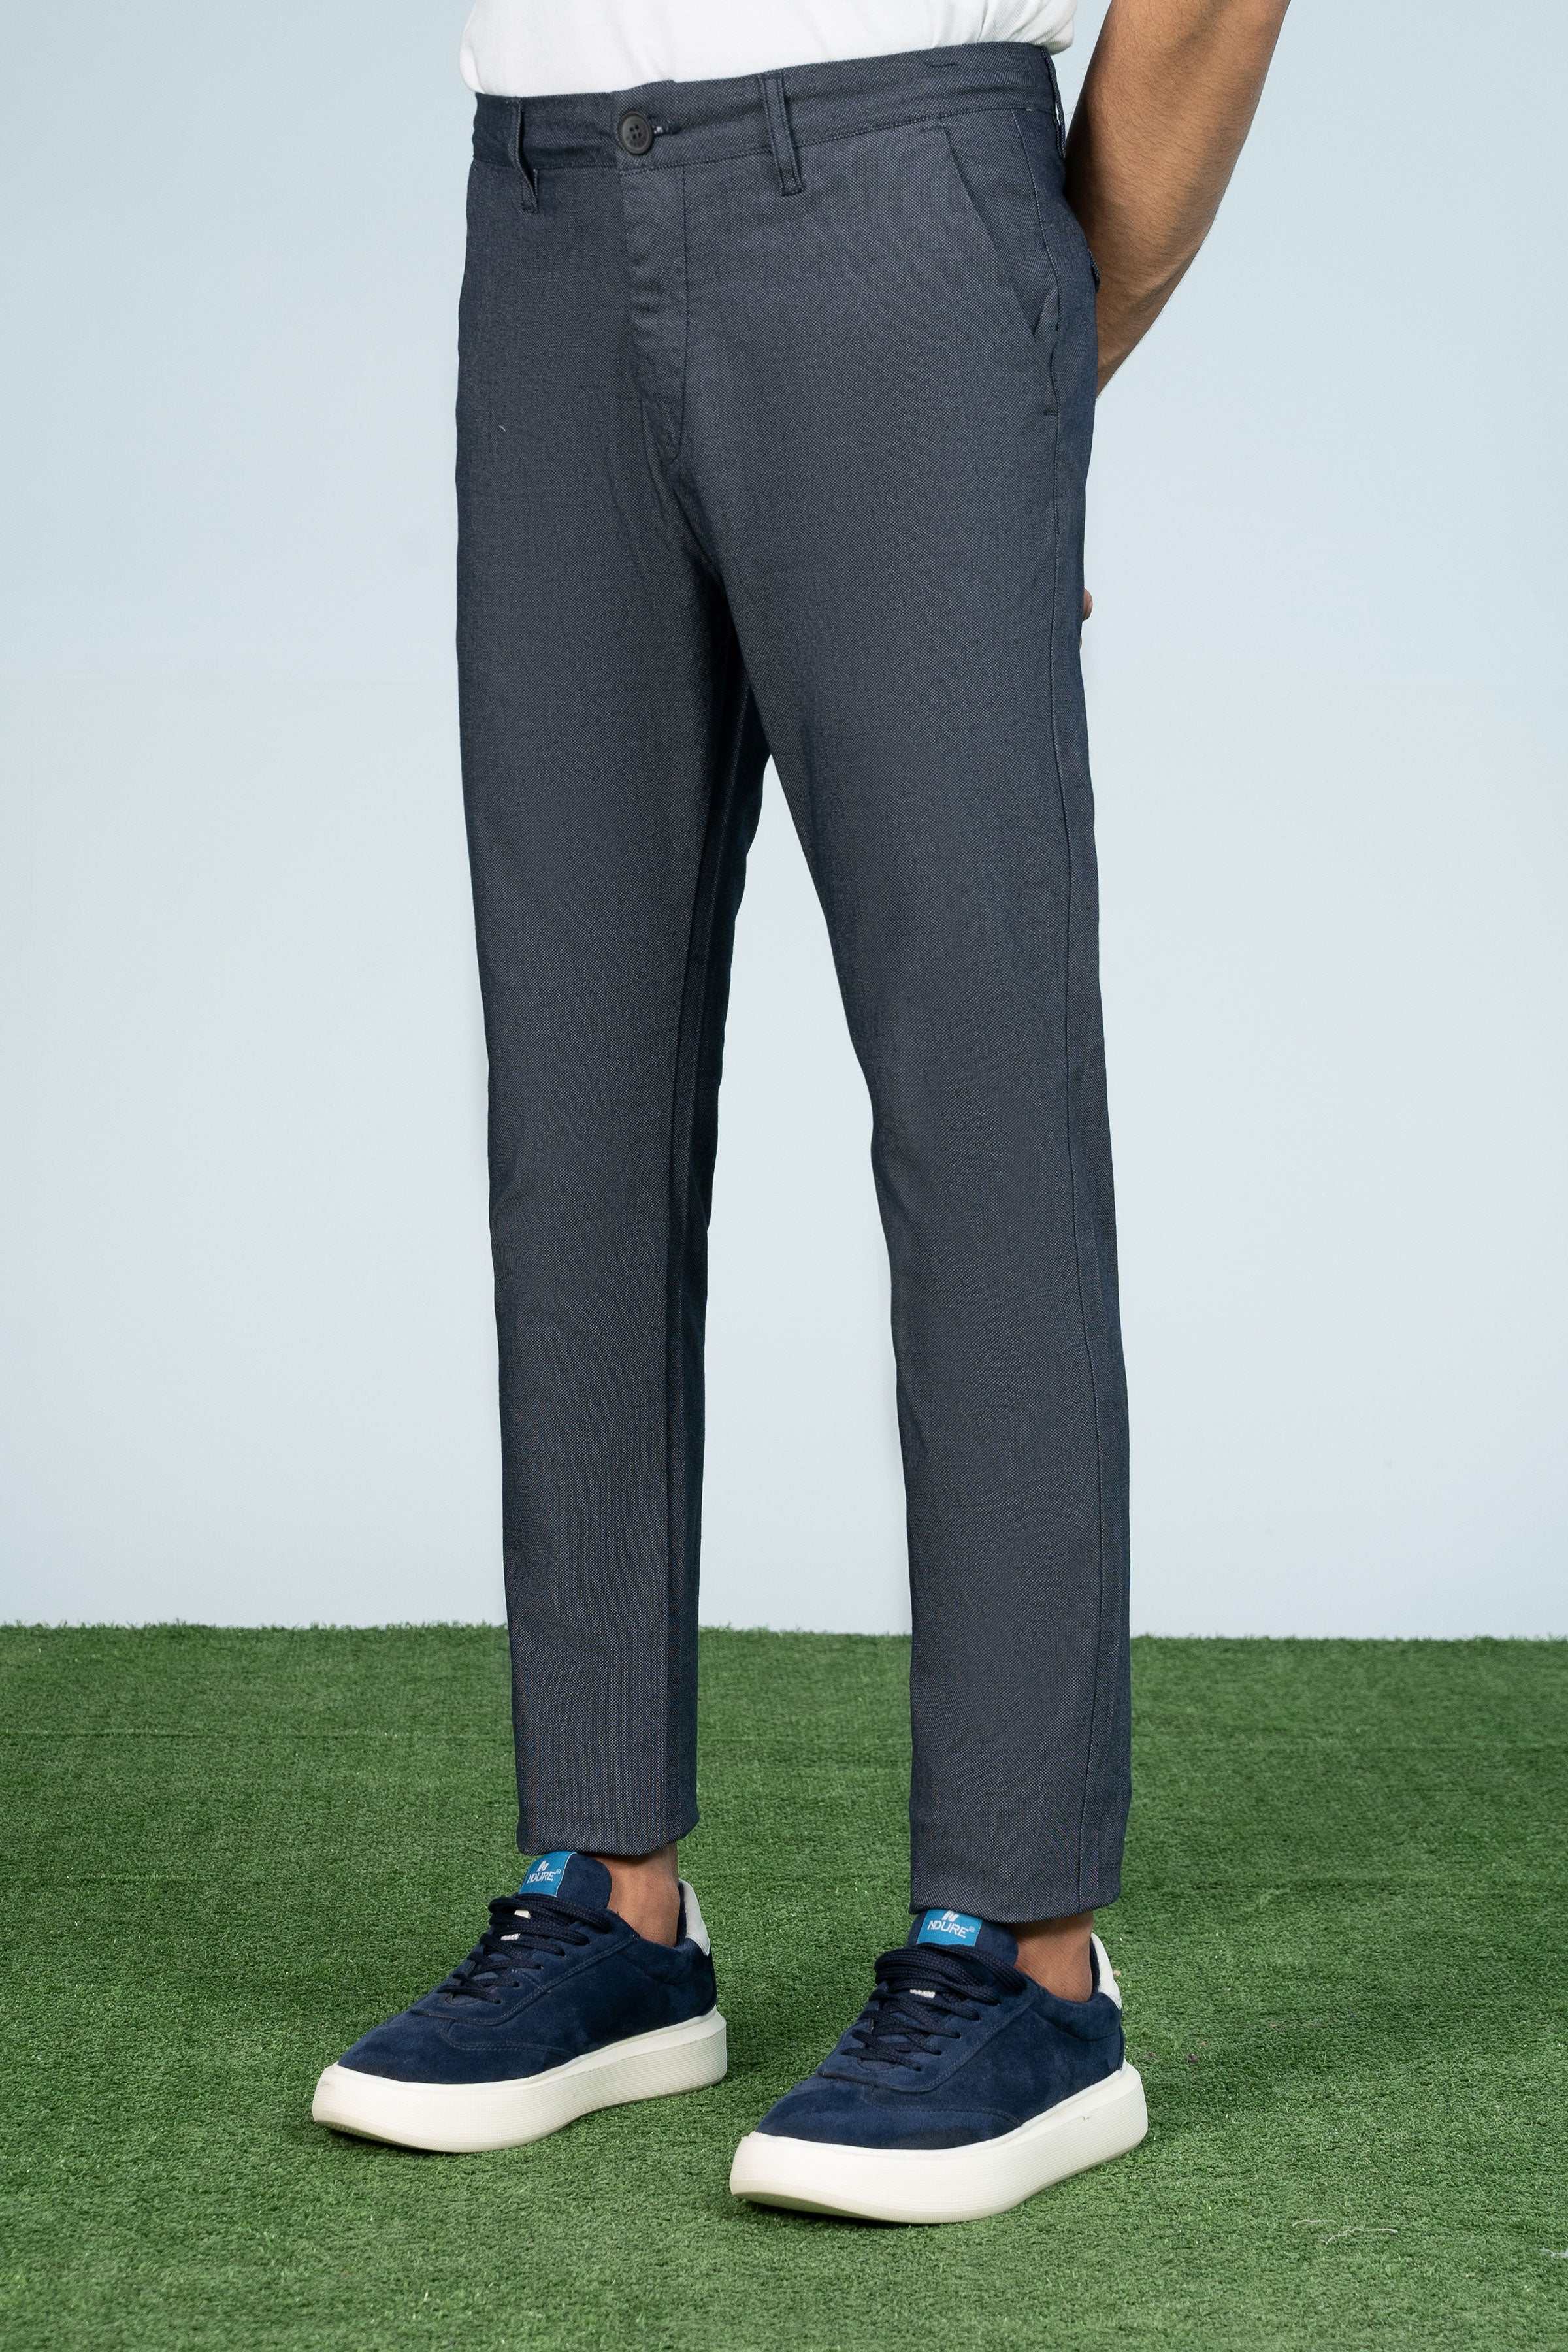 CROSS POCKET TEXTURED PANT NAVY - Charcoal Clothing